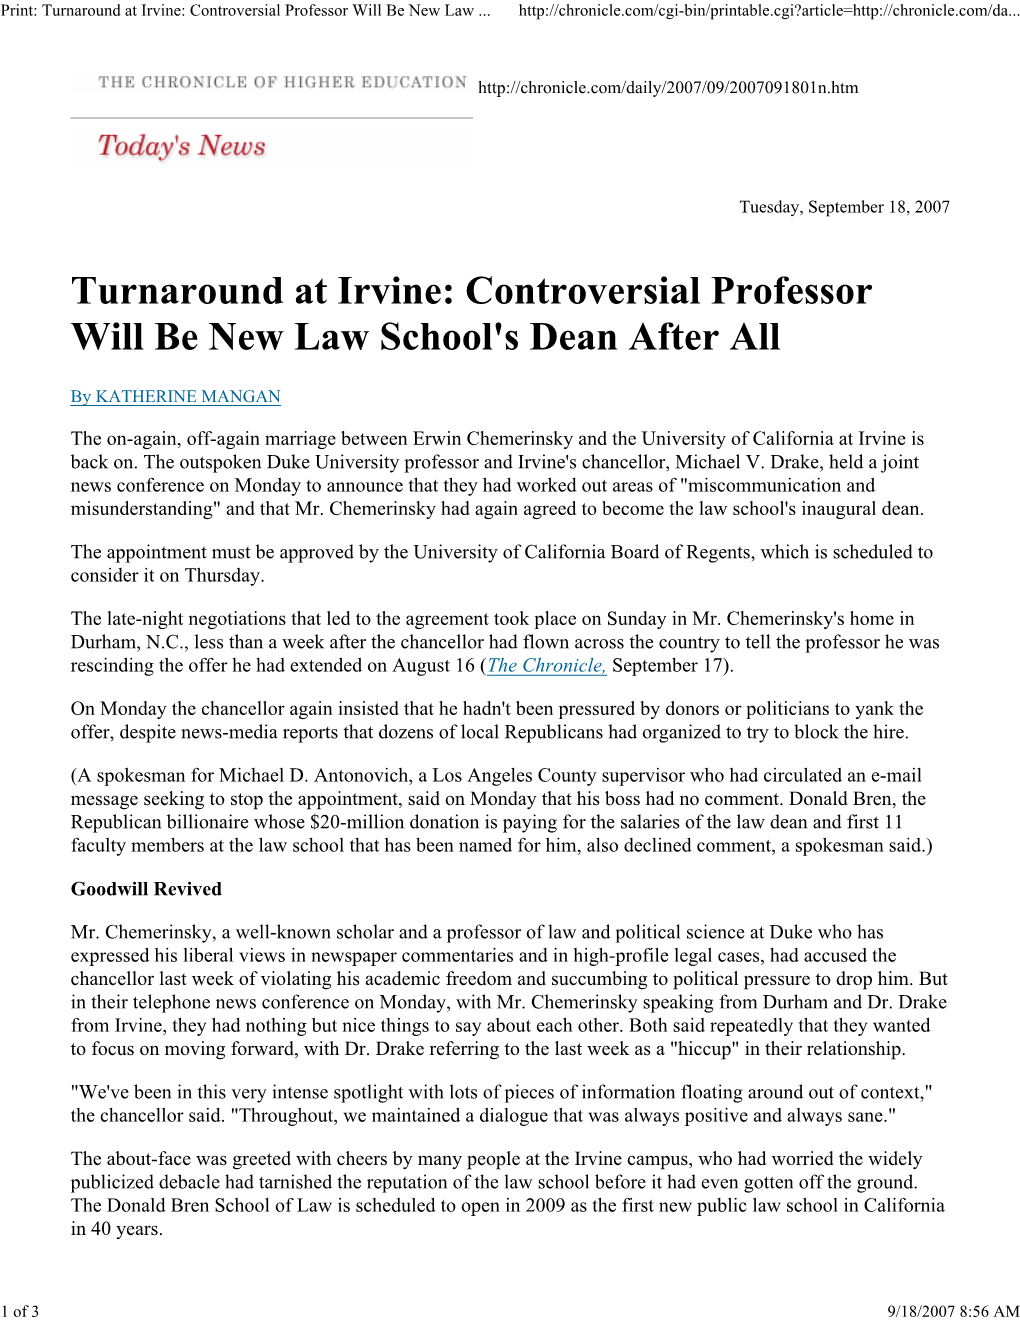 Turnaround at Irvine: Controversial Professor Will Be New Law